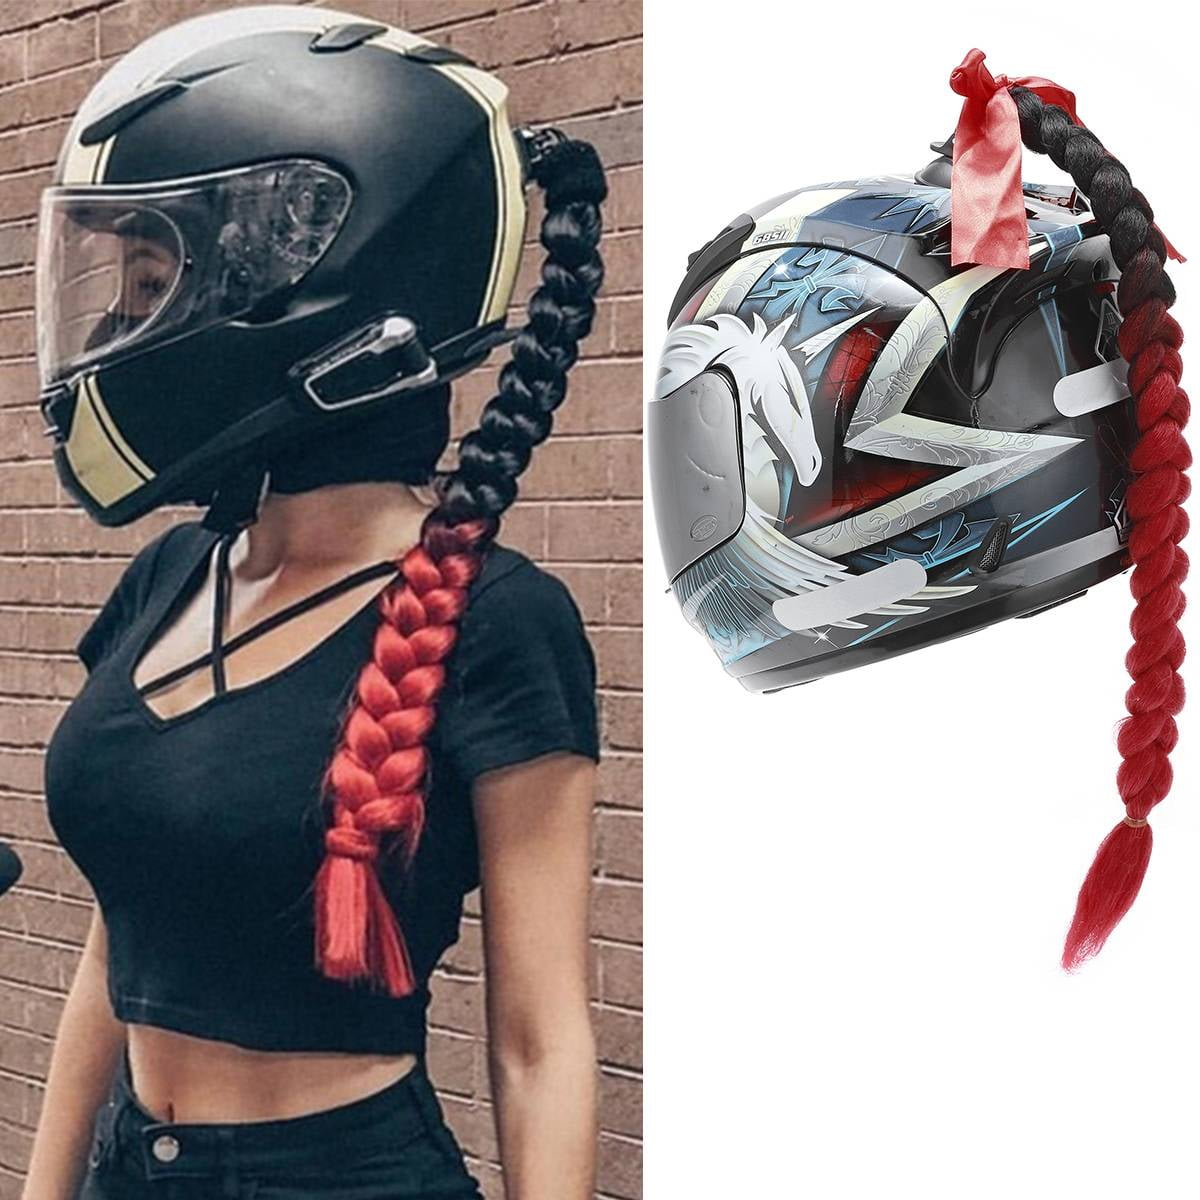 3T-SISTER Helmet Pigtails Gradient Ramp Helmet Braids Ponytail Helmet Hair with Suction Cup with Bowknot or Rose for Motor Bike 1PCS 24inch Many Colors Helmet not Included 